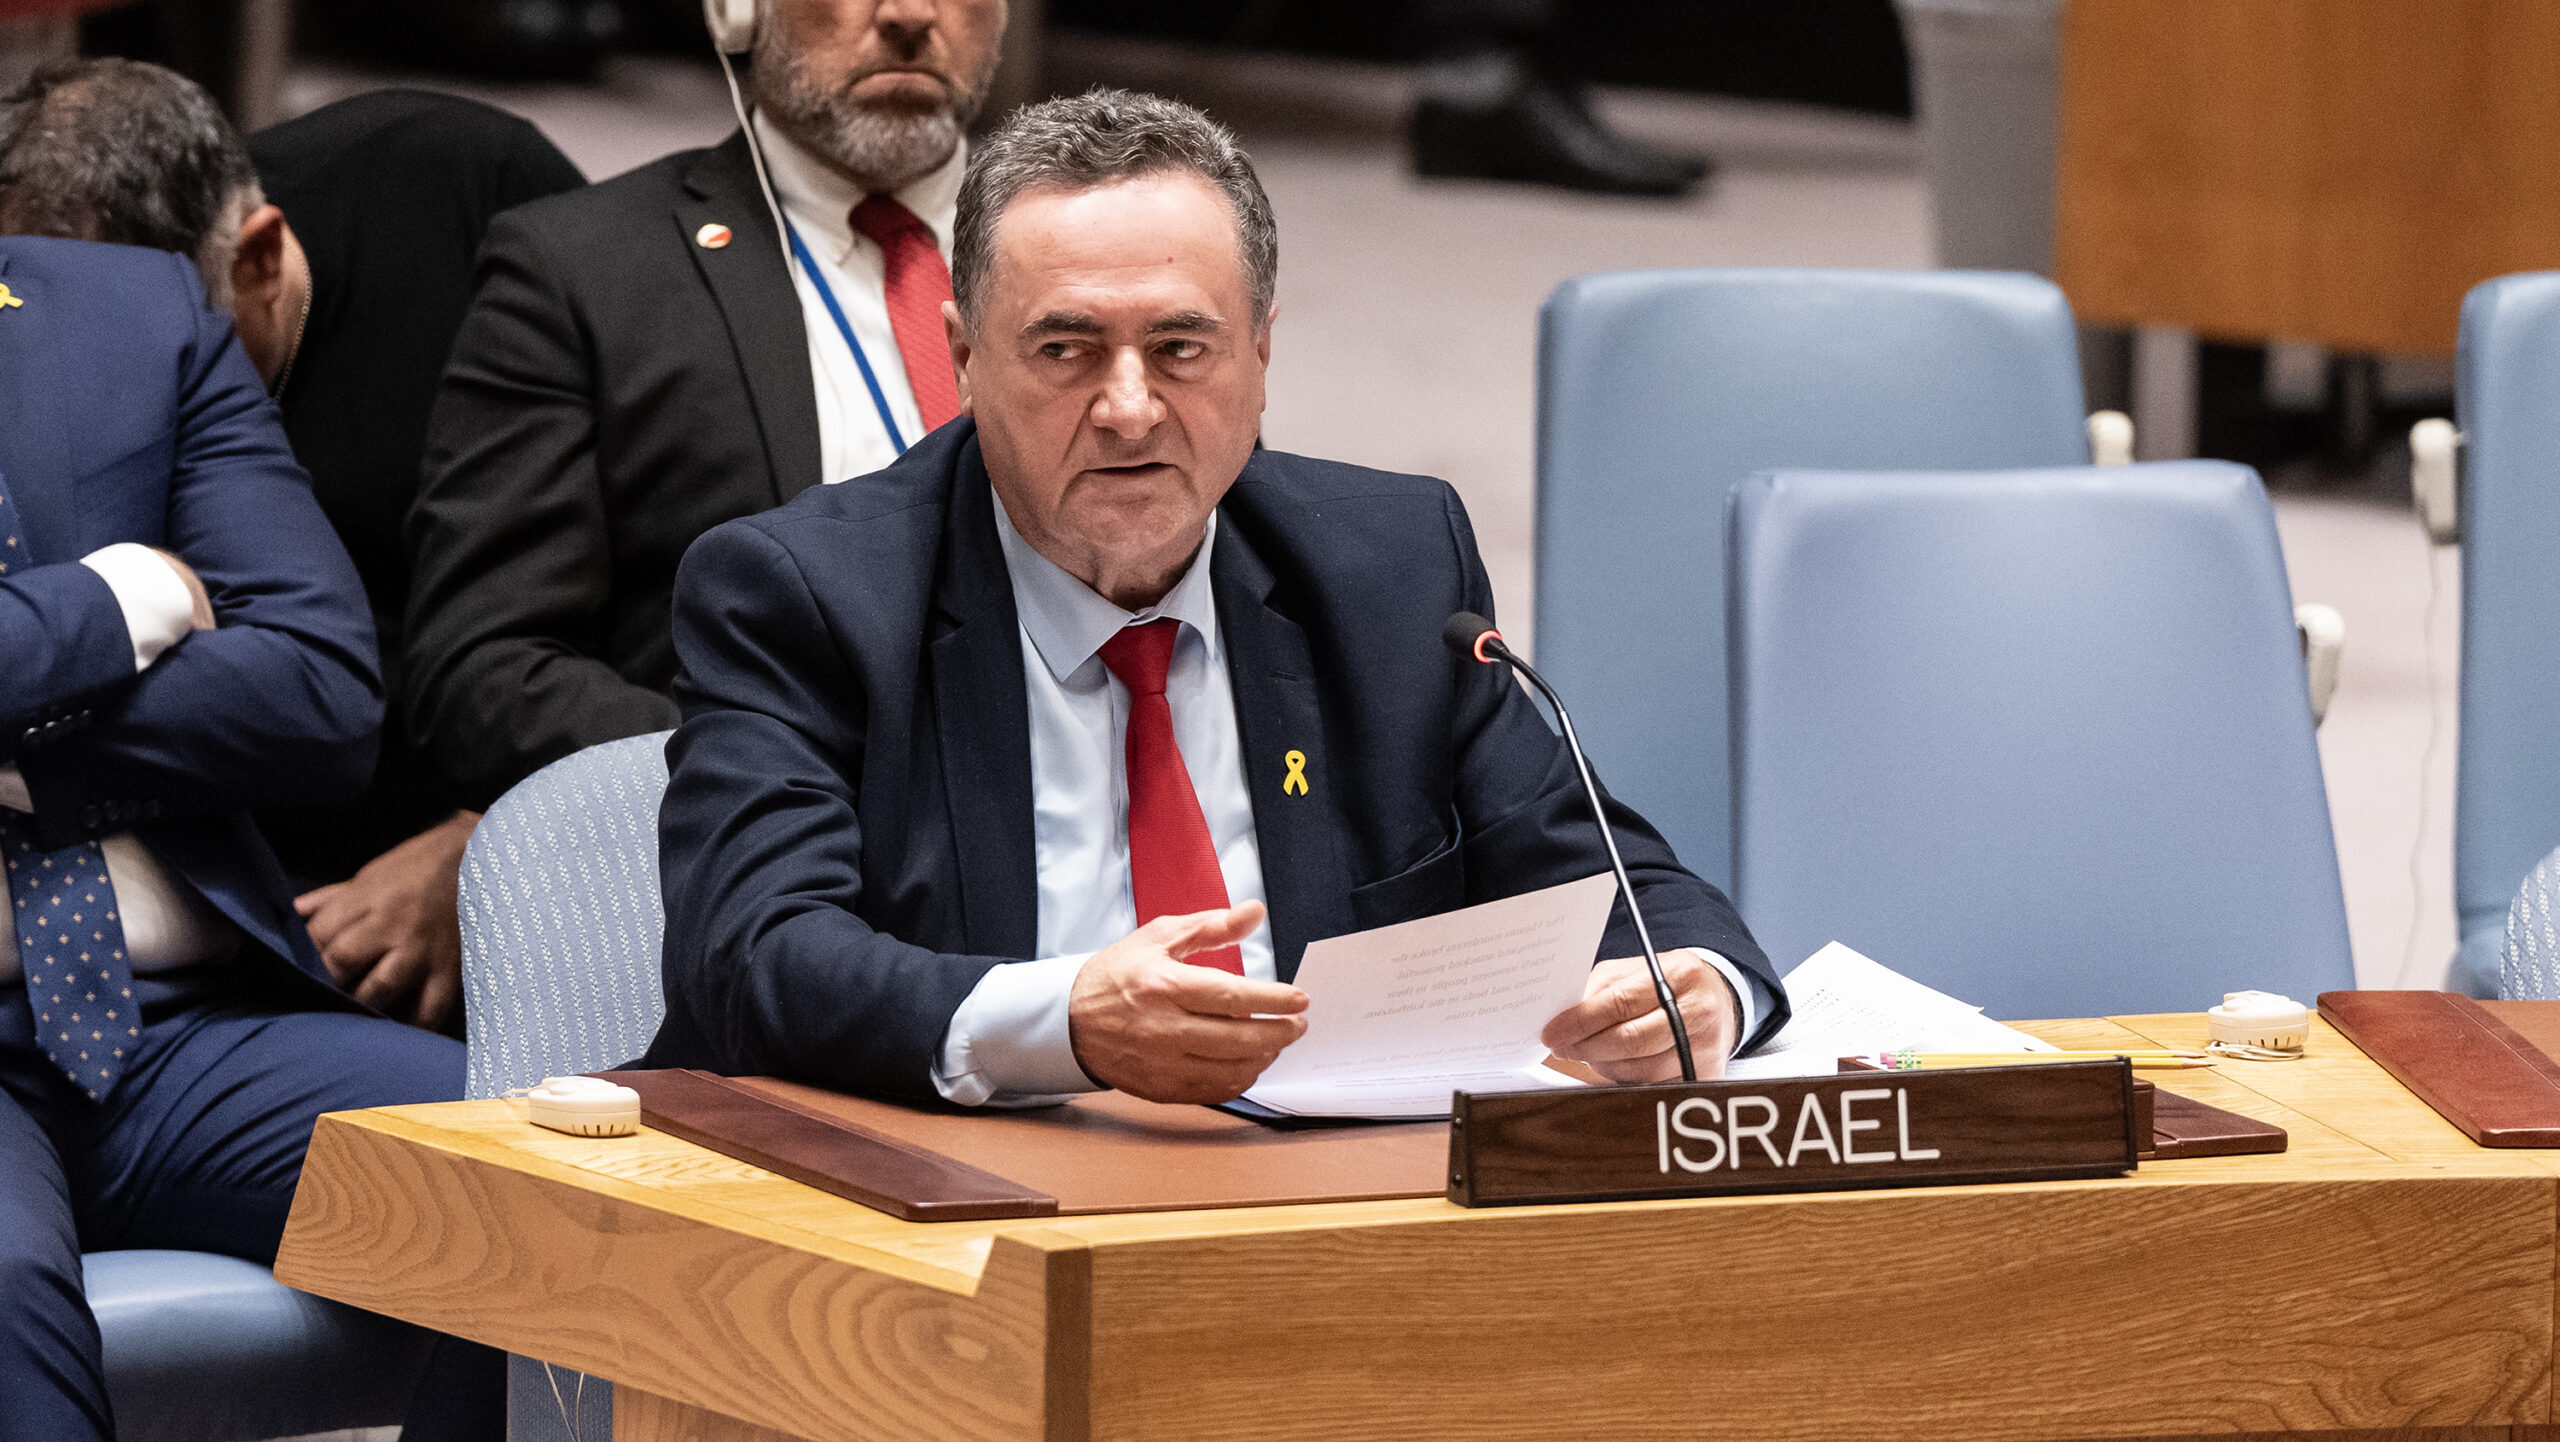 Israel’s Foreign Minister Praises EU’s ‘Dramatic’ New Sanctions Against Iran